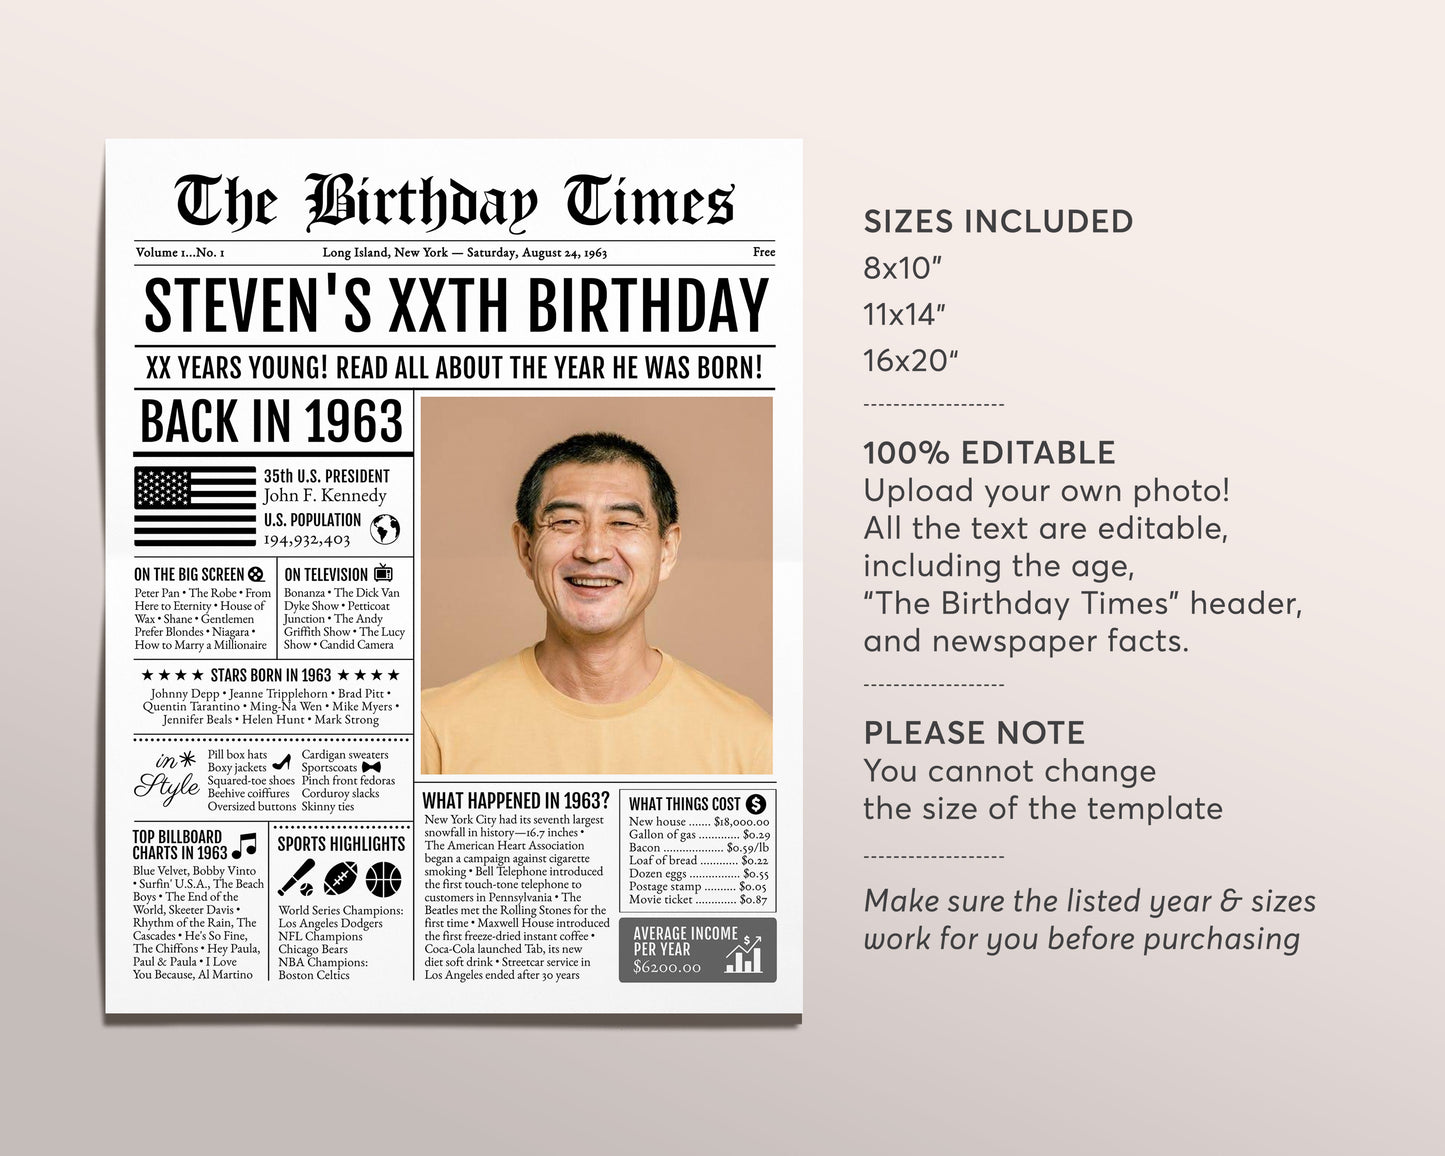 Back in 1963 Birthday Newspaper Editable Template, 60 61 62 Years Ago, 60th 61st 62nd Birthday Sign Decorations Decor for Men or Women